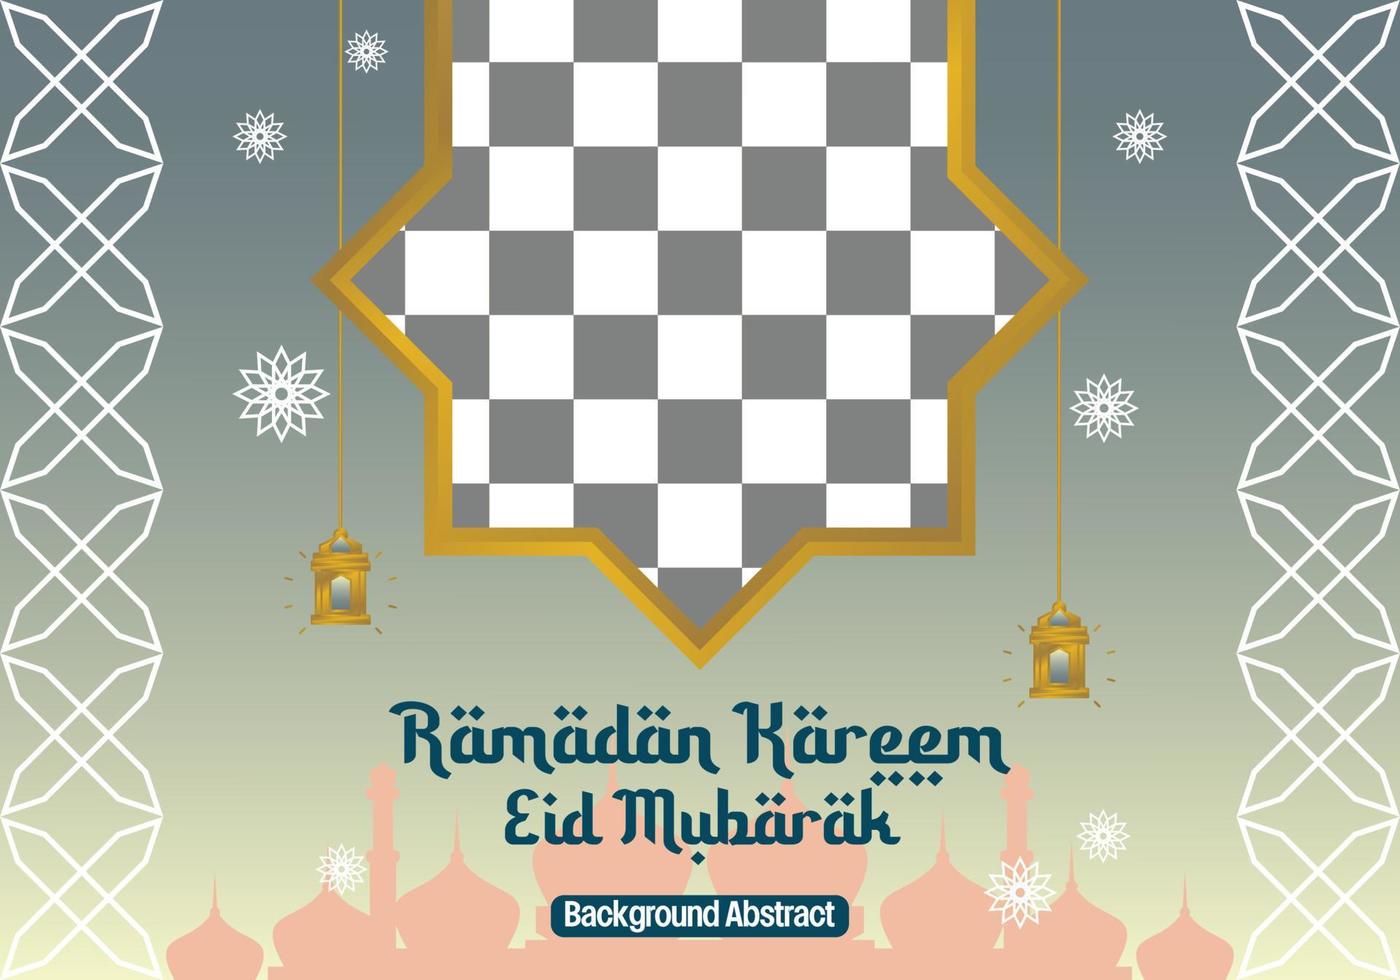 editable ramadan sale poster template. with mandala ornaments, lanterns and the silhouette of a mosque. Design for social media, banner, greeting card and web. Islamic holiday vector illustration